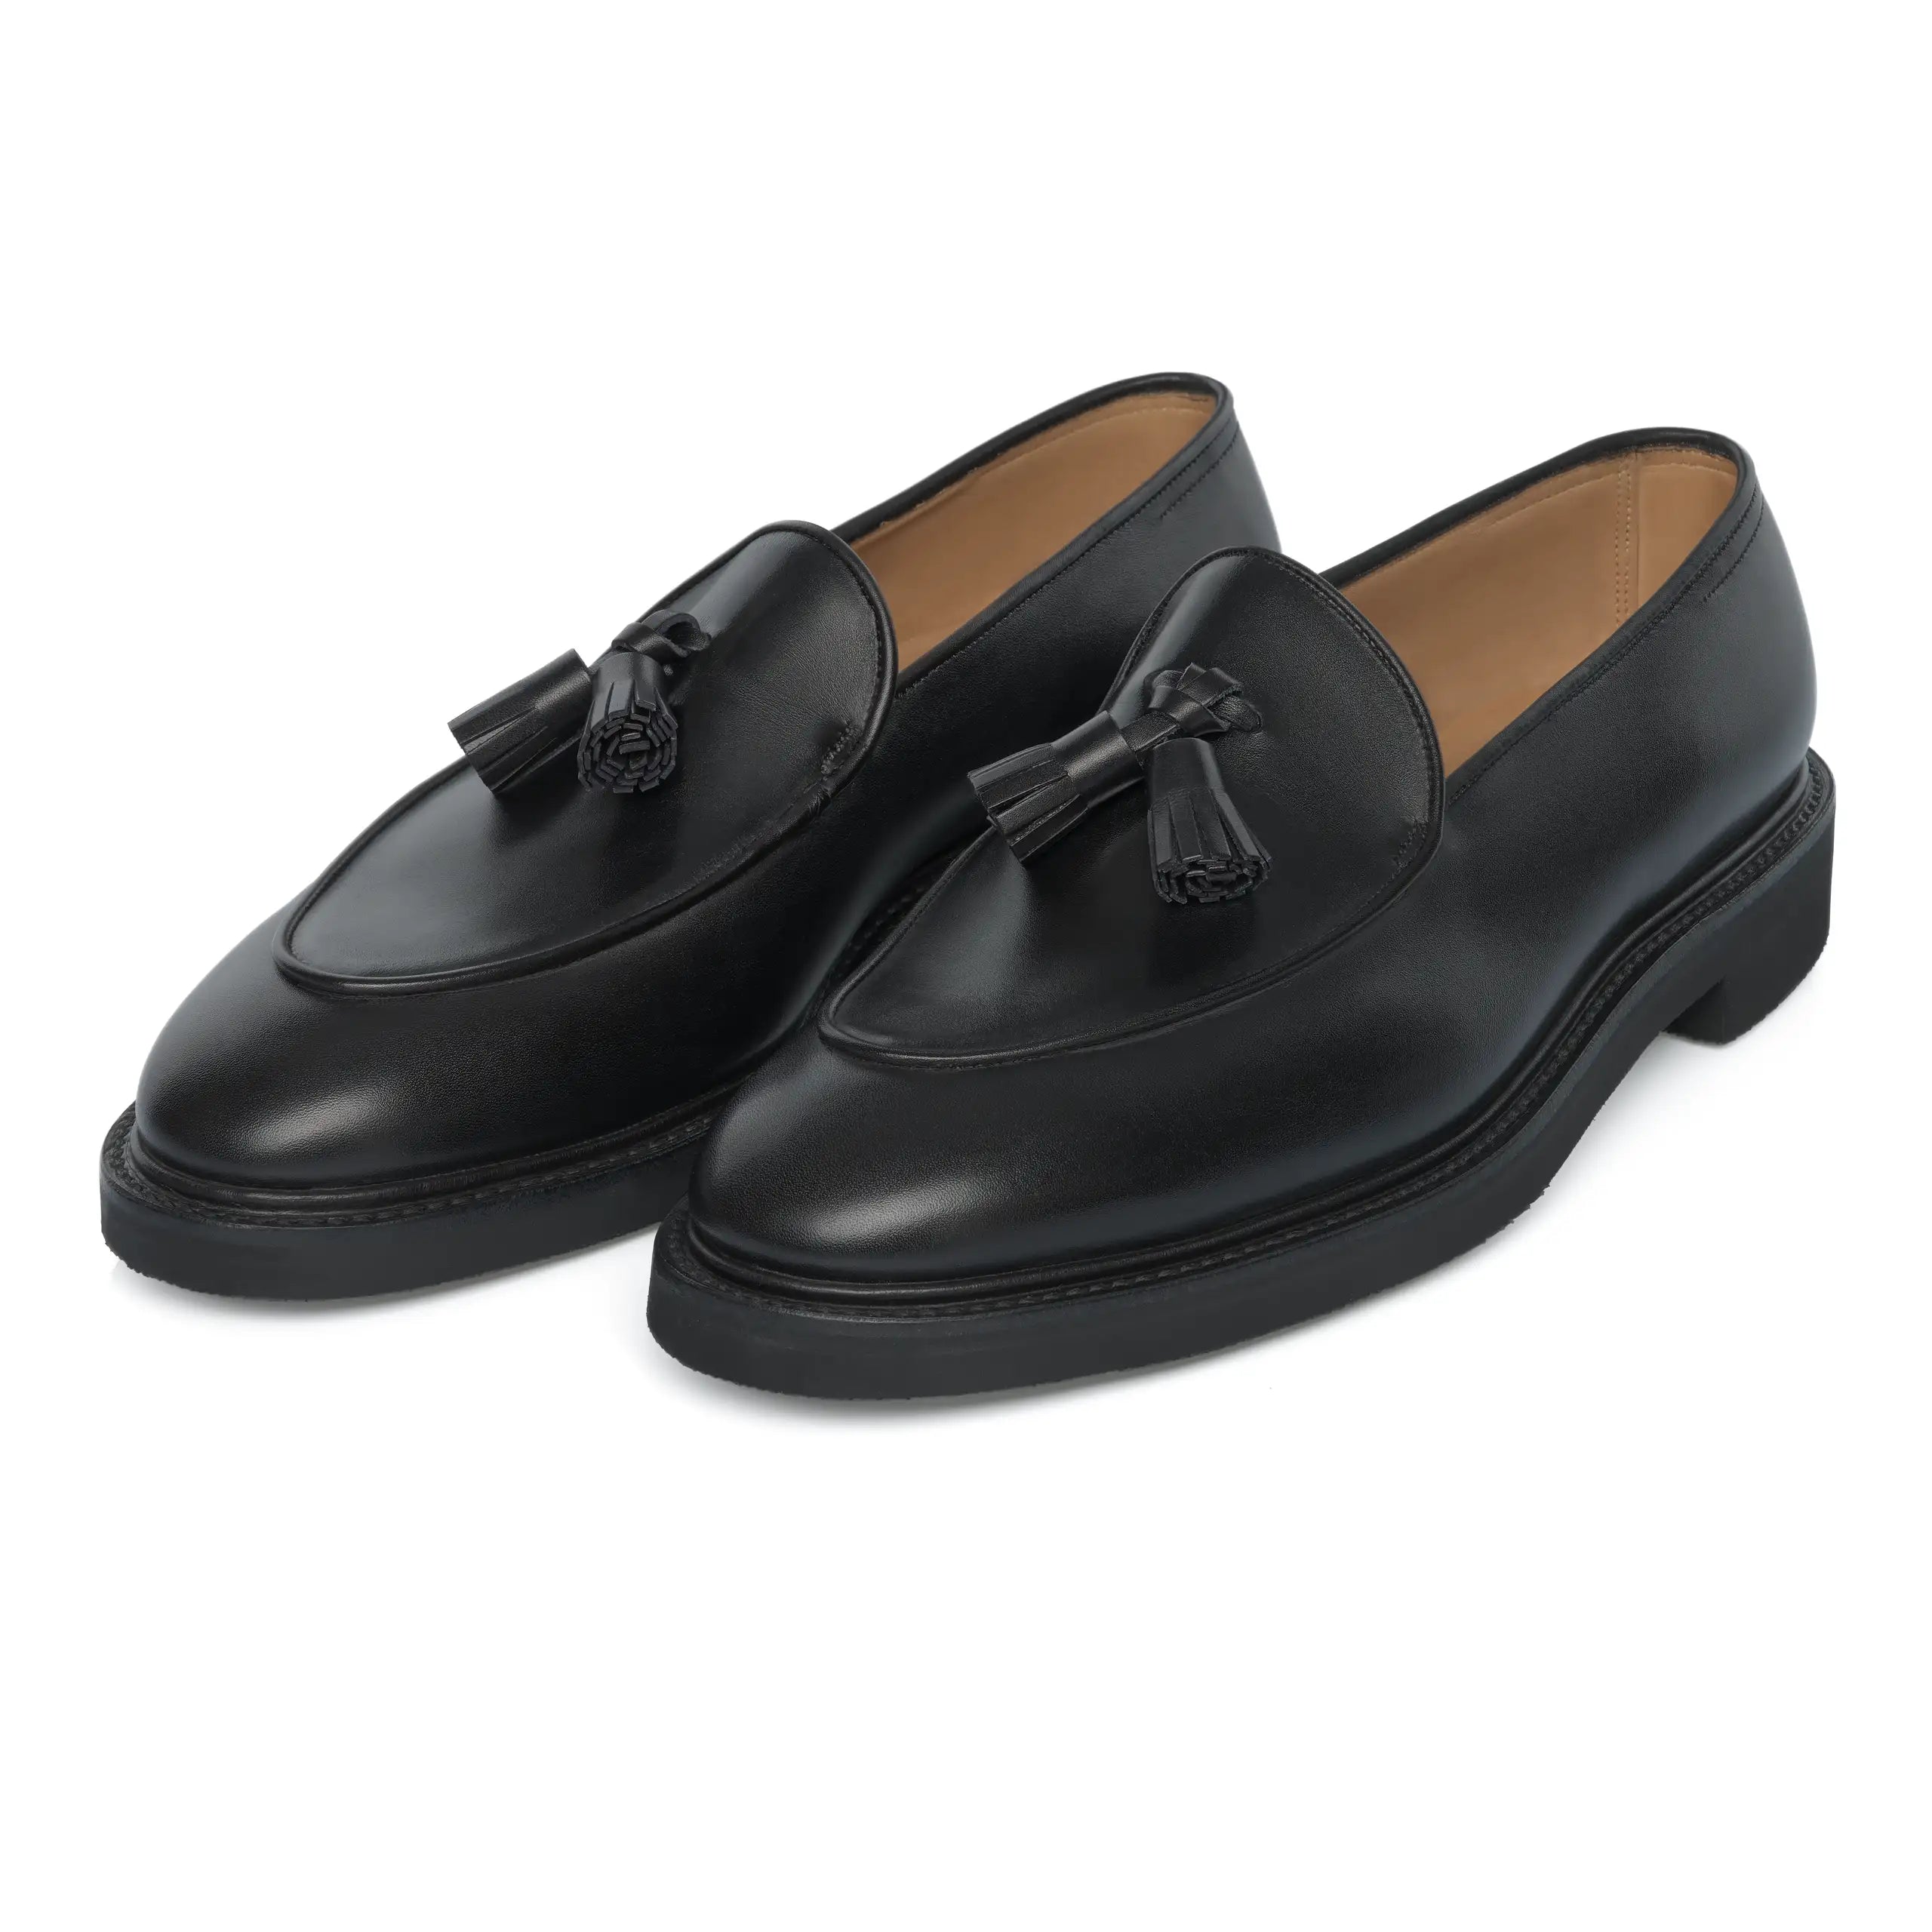 "Edmond" Leather Tassel Loafer with Hand-Stitched Apron in Black